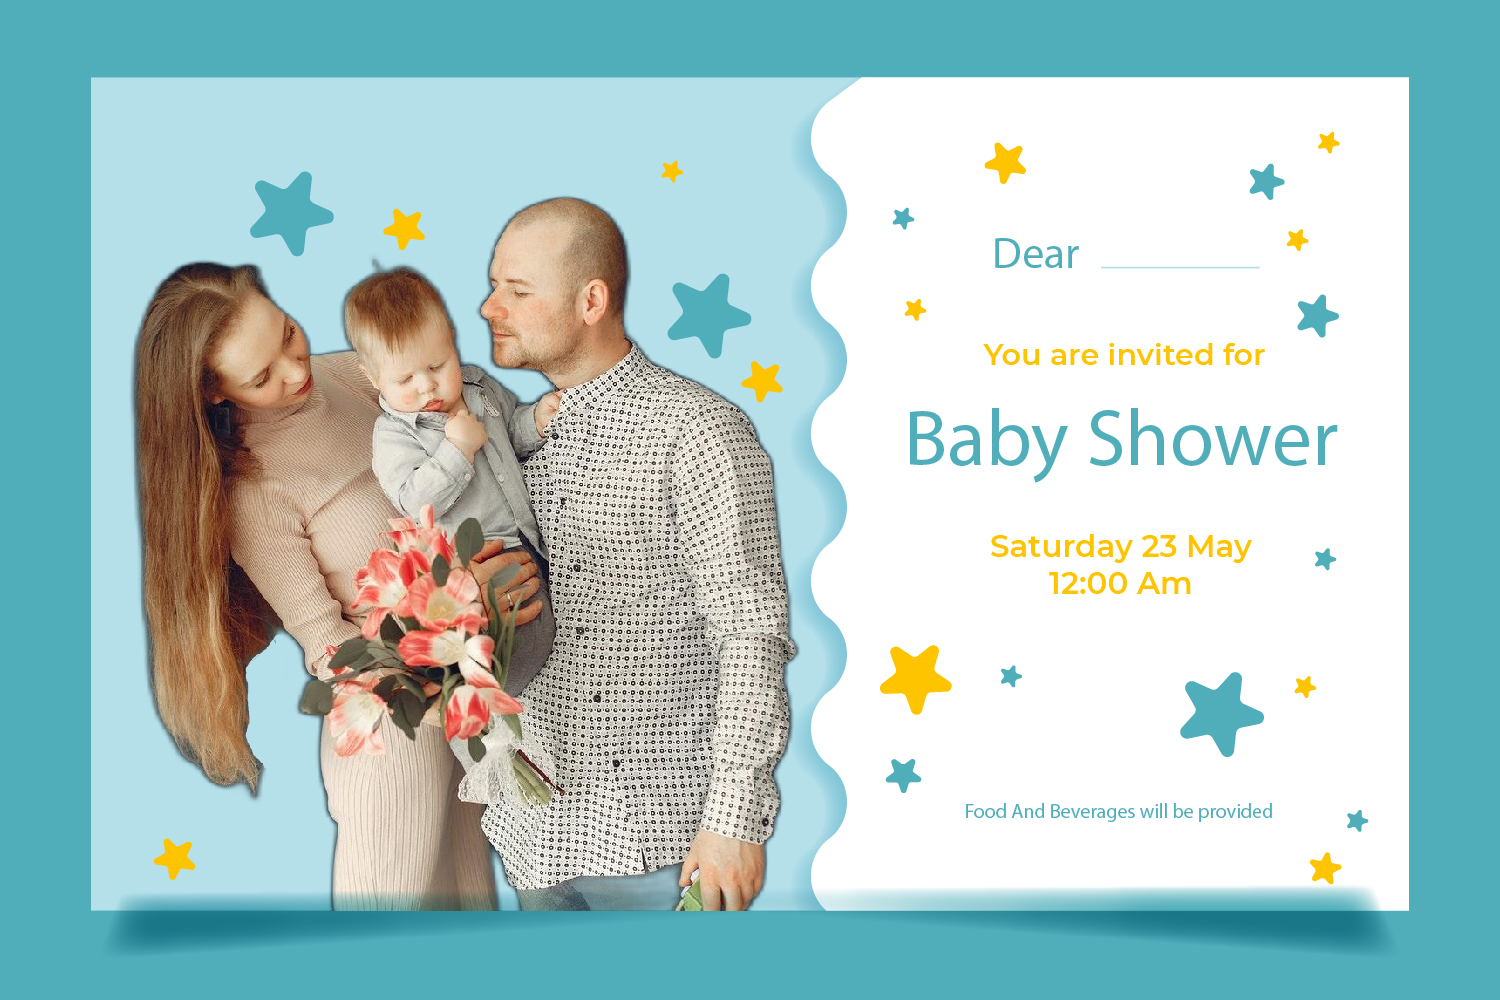 Image of a baby shower invitation card using no-bg background removal service